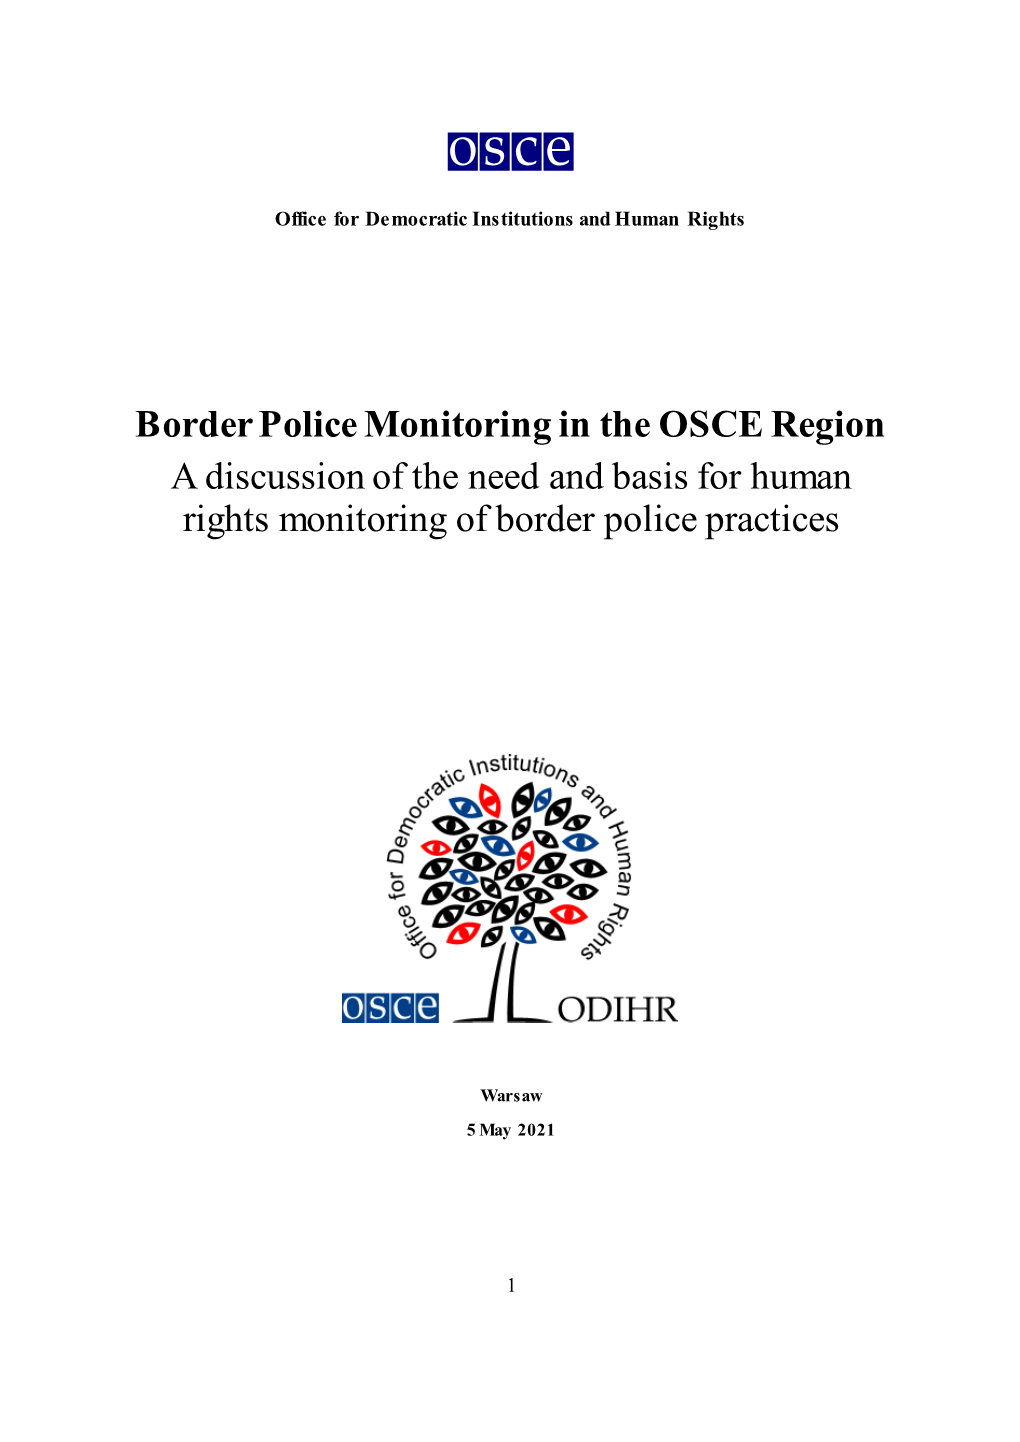 Border Police Monitoring in the OSCE Region a Discussion of the Need and Basis for Human Rights Monitoring of Border Police Practices